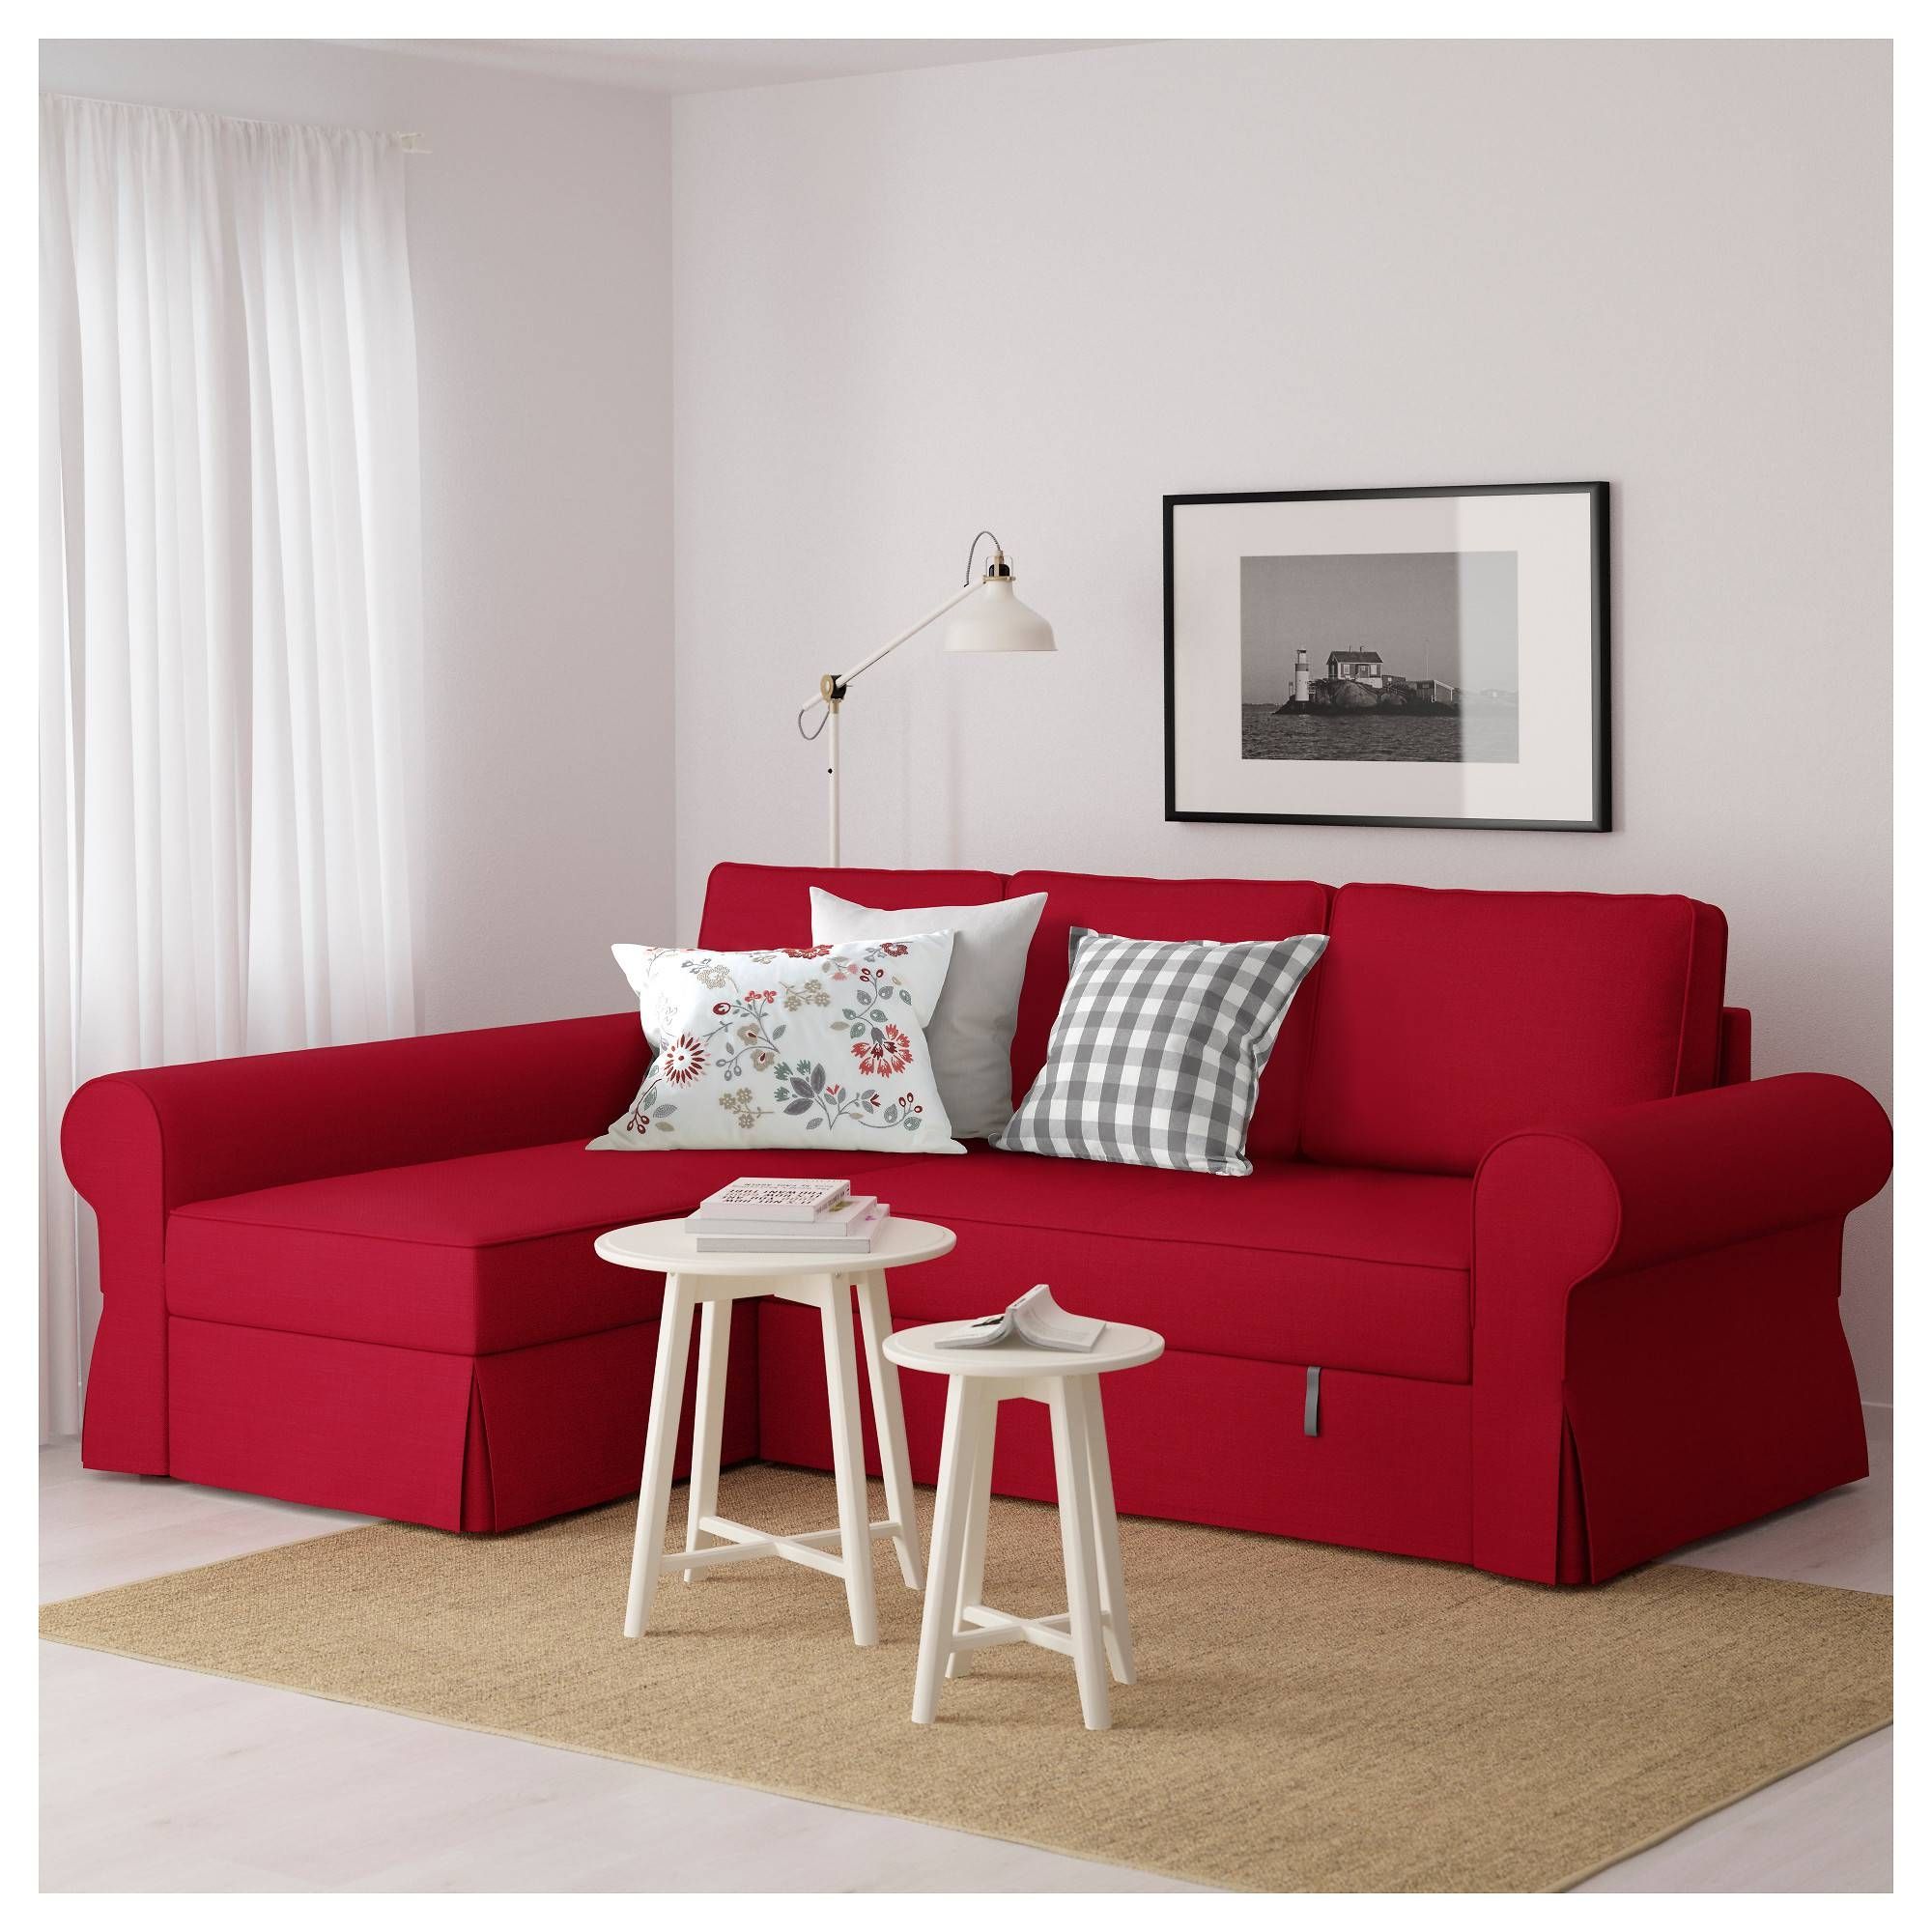 Backabro Sofa Bed With Chaise Longue Nordvalla Red – Ikea For Red Sofa Beds Ikea (View 23 of 30)